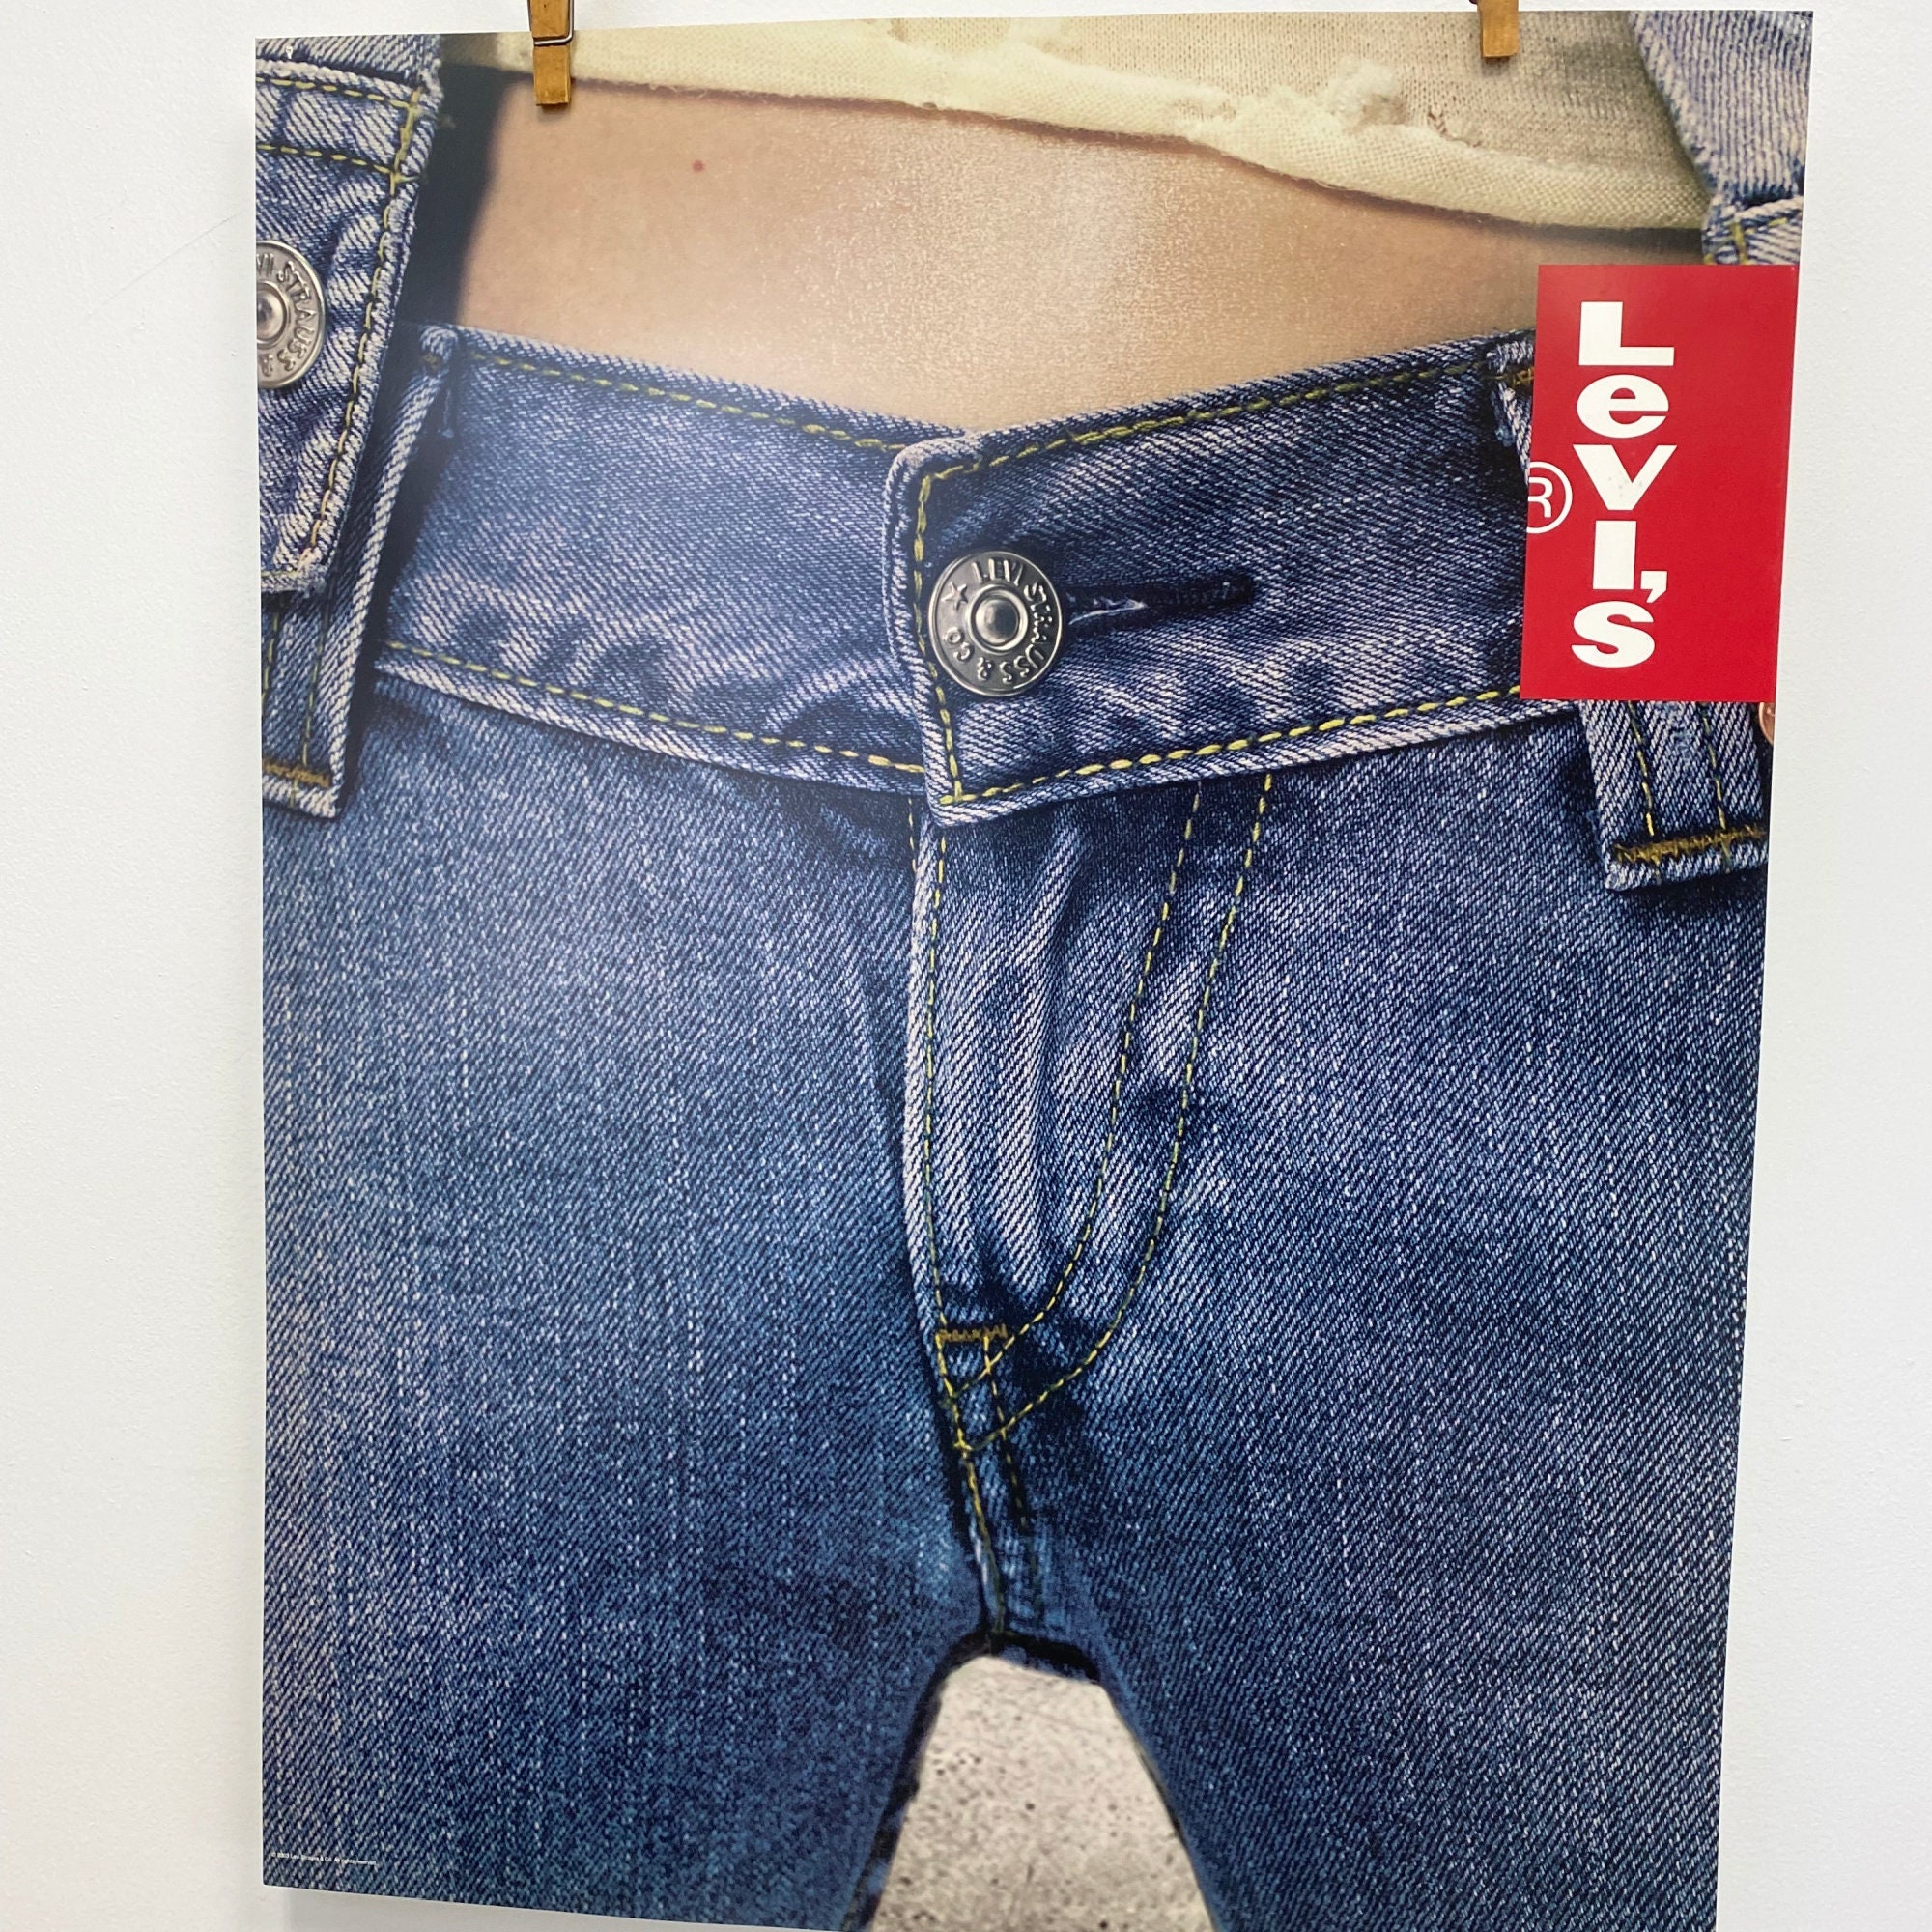 Authentic Levi's Advertising Poster Store Display Levi - Etsy Denmark